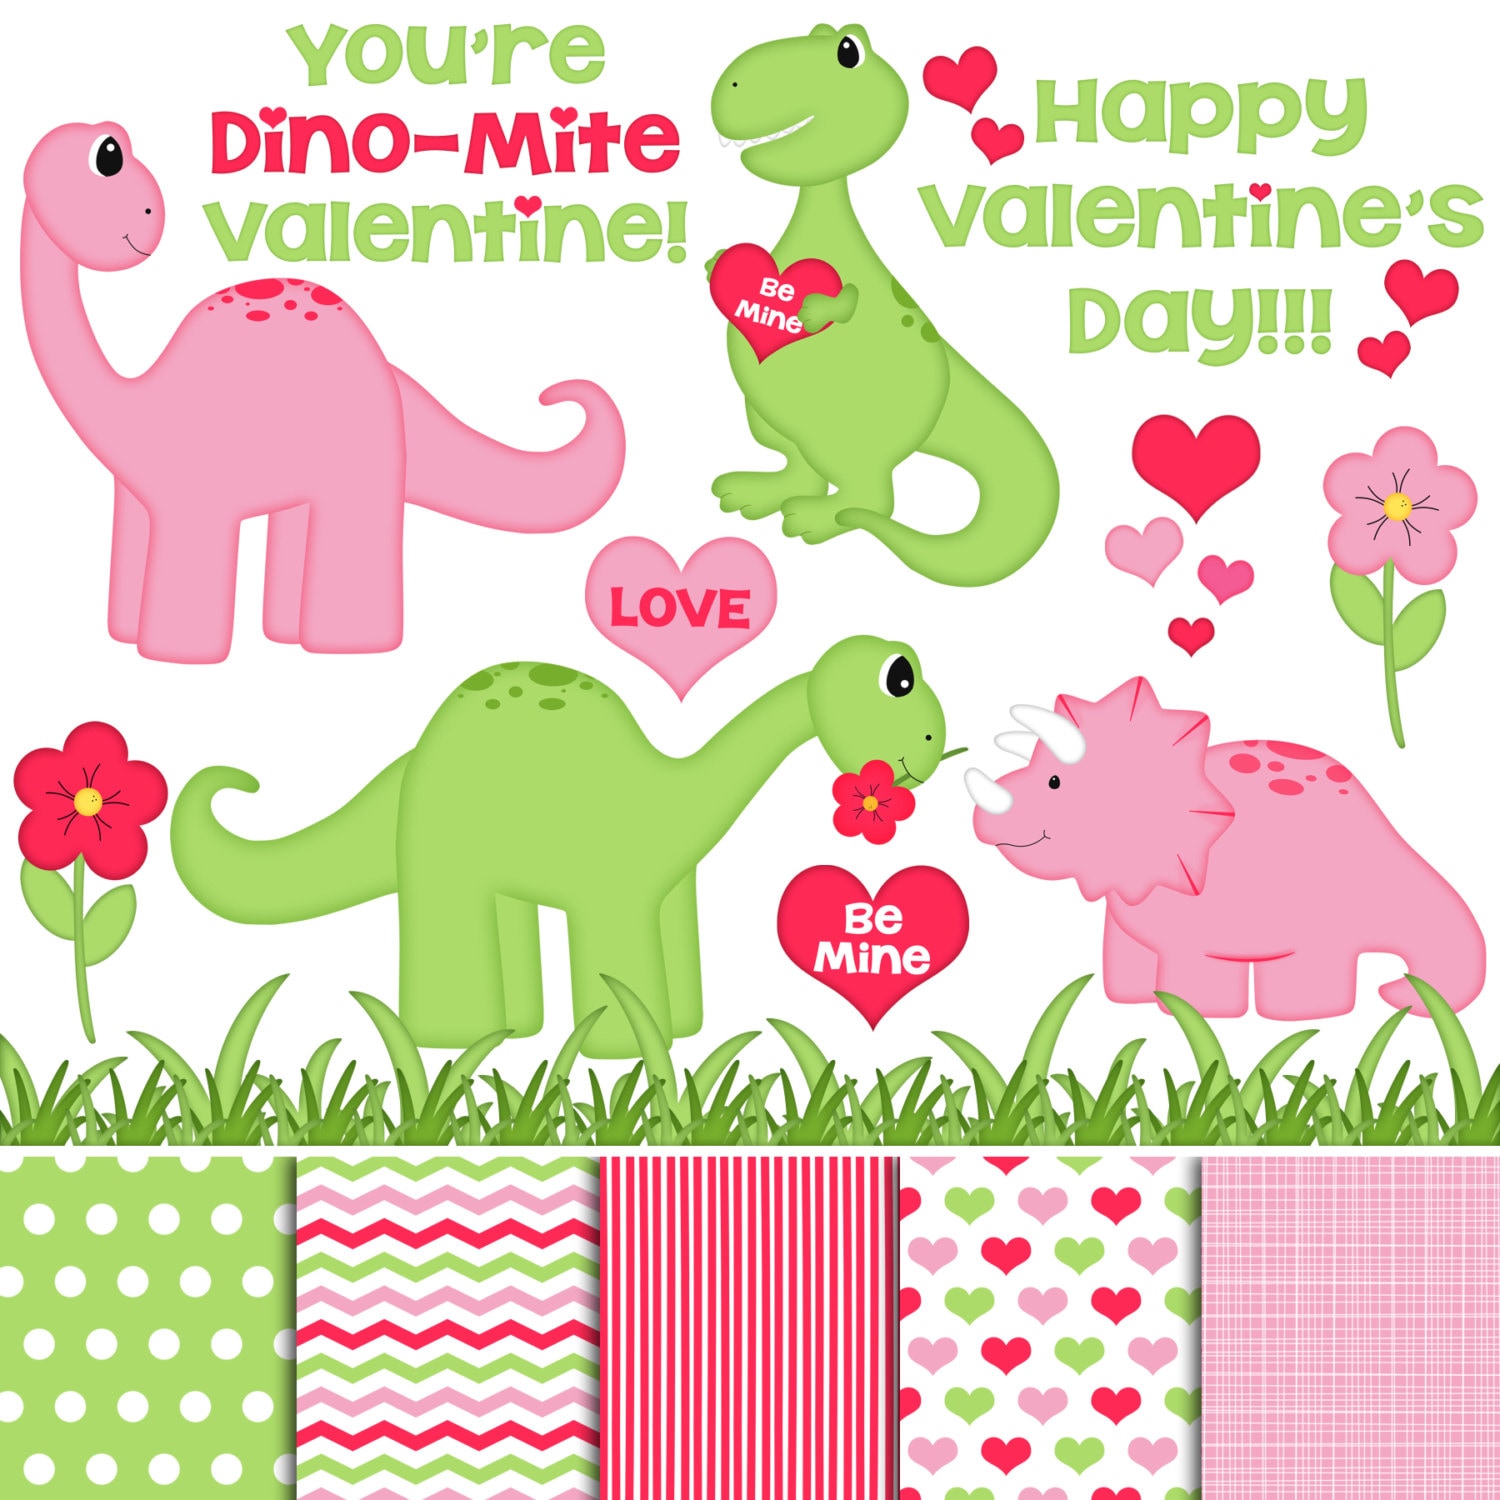 Dino Valentine digital clipart and digital paper set consists of the follow...